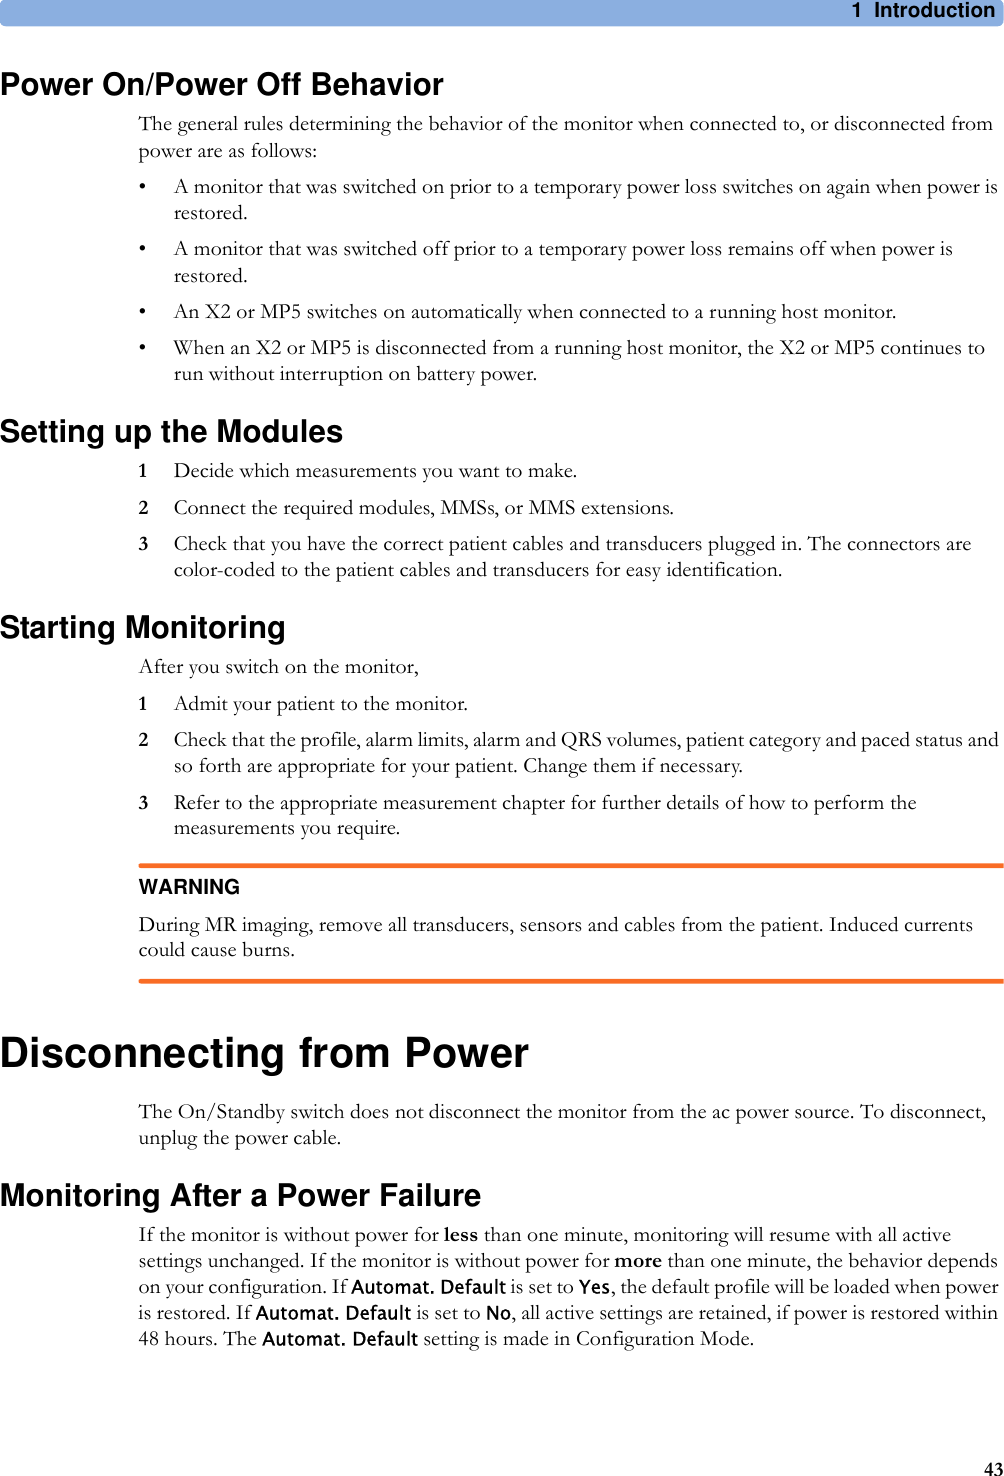 1 Introduction43Power On/Power Off BehaviorThe general rules determining the behavior of the monitor when connected to, or disconnected from power are as follows:• A monitor that was switched on prior to a temporary power loss switches on again when power is restored.• A monitor that was switched off prior to a temporary power loss remains off when power is restored.• An X2 or MP5 switches on automatically when connected to a running host monitor.• When an X2 or MP5 is disconnected from a running host monitor, the X2 or MP5 continues to run without interruption on battery power.Setting up the Modules1Decide which measurements you want to make.2Connect the required modules, MMSs, or MMS extensions.3Check that you have the correct patient cables and transducers plugged in. The connectors are color-coded to the patient cables and transducers for easy identification.Starting MonitoringAfter you switch on the monitor,1Admit your patient to the monitor.2Check that the profile, alarm limits, alarm and QRS volumes, patient category and paced status and so forth are appropriate for your patient. Change them if necessary.3Refer to the appropriate measurement chapter for further details of how to perform the measurements you require.WARNINGDuring MR imaging, remove all transducers, sensors and cables from the patient. Induced currents could cause burns.Disconnecting from PowerThe On/Standby switch does not disconnect the monitor from the ac power source. To disconnect, unplug the power cable.Monitoring After a Power FailureIf the monitor is without power for less than one minute, monitoring will resume with all active settings unchanged. If the monitor is without power for more than one minute, the behavior depends on your configuration. If Automat. Default is set to Yes, the default profile will be loaded when power is restored. If Automat. Default is set to No, all active settings are retained, if power is restored within 48 hours. The Automat. Default setting is made in Configuration Mode.